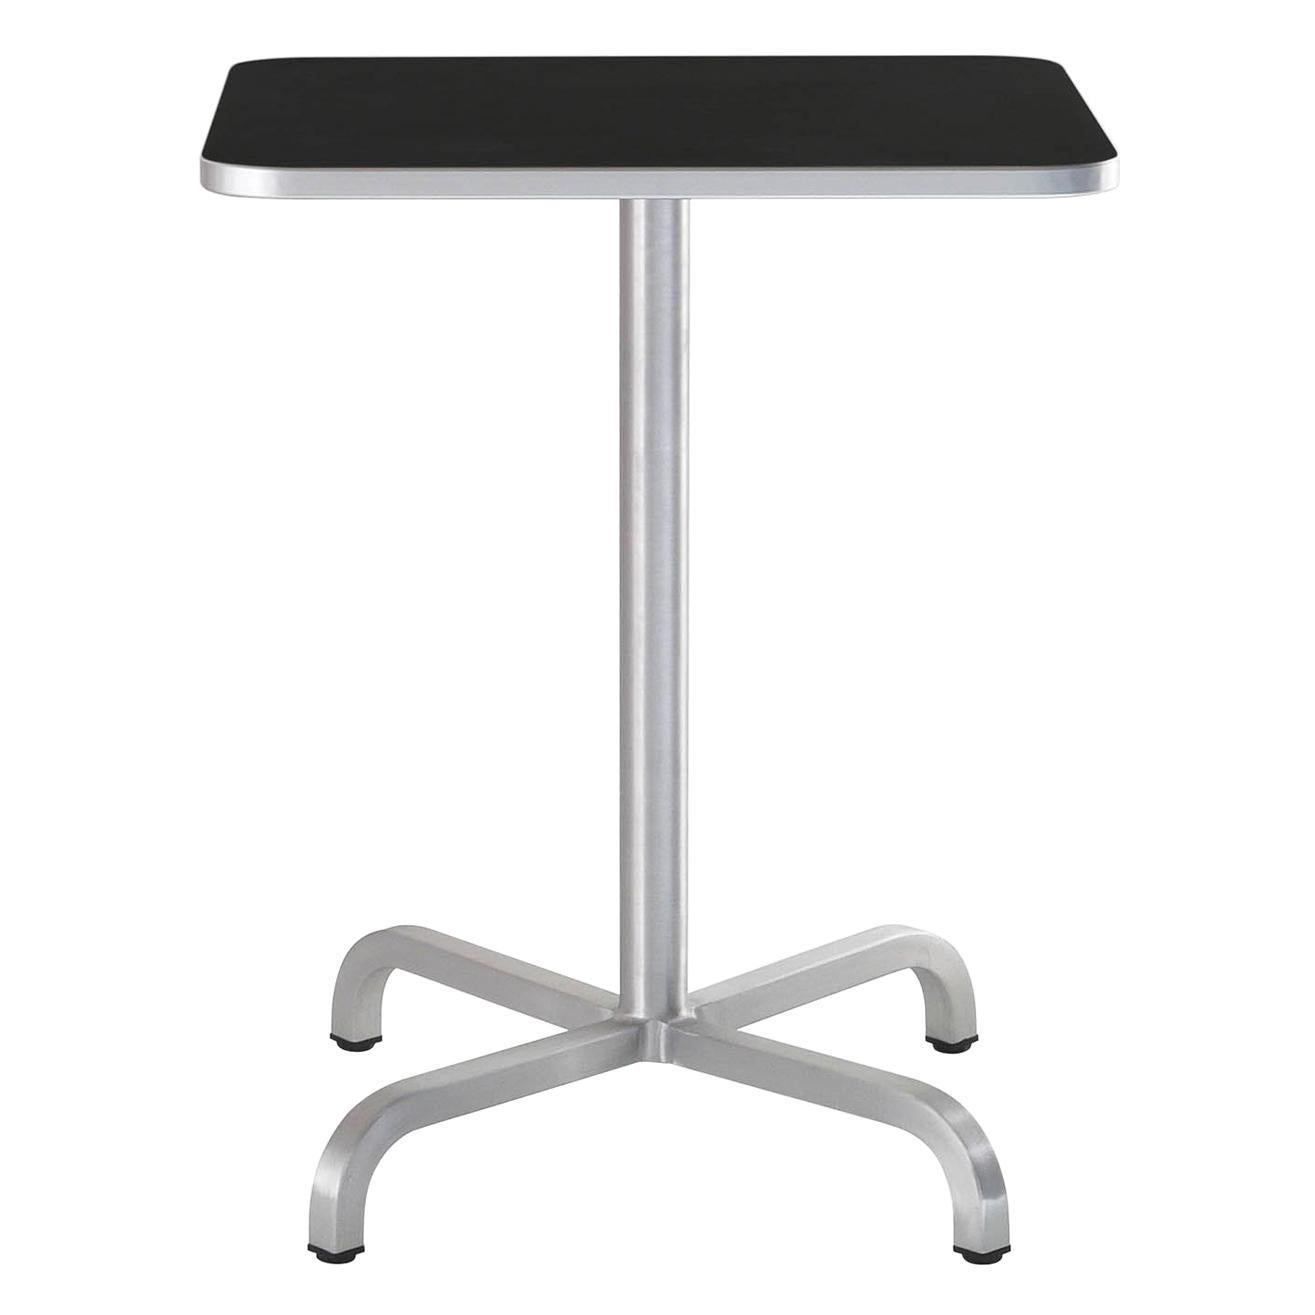 Emeco 20-06 Small Square Café Table with Black Laminate Top by Norman Foster For Sale